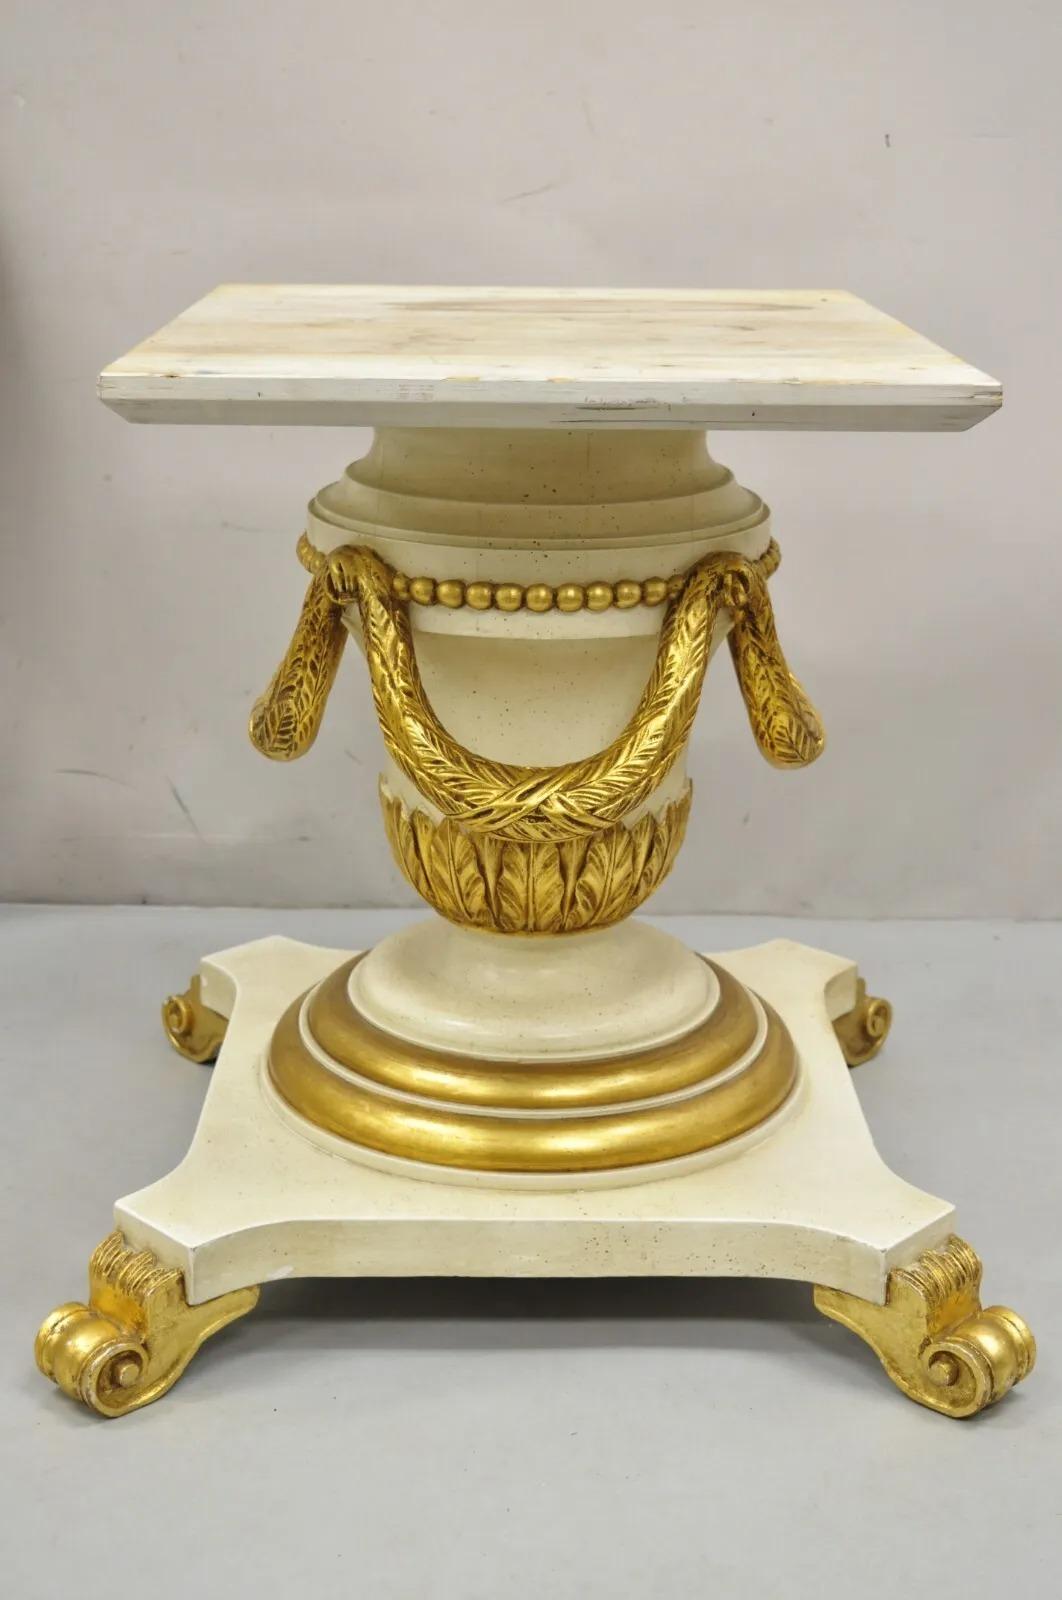 Italian Regency Cream & Gold Gilt Lacquered Urn Pedestal Dining Table - 3 Leaves In Good Condition For Sale In Philadelphia, PA